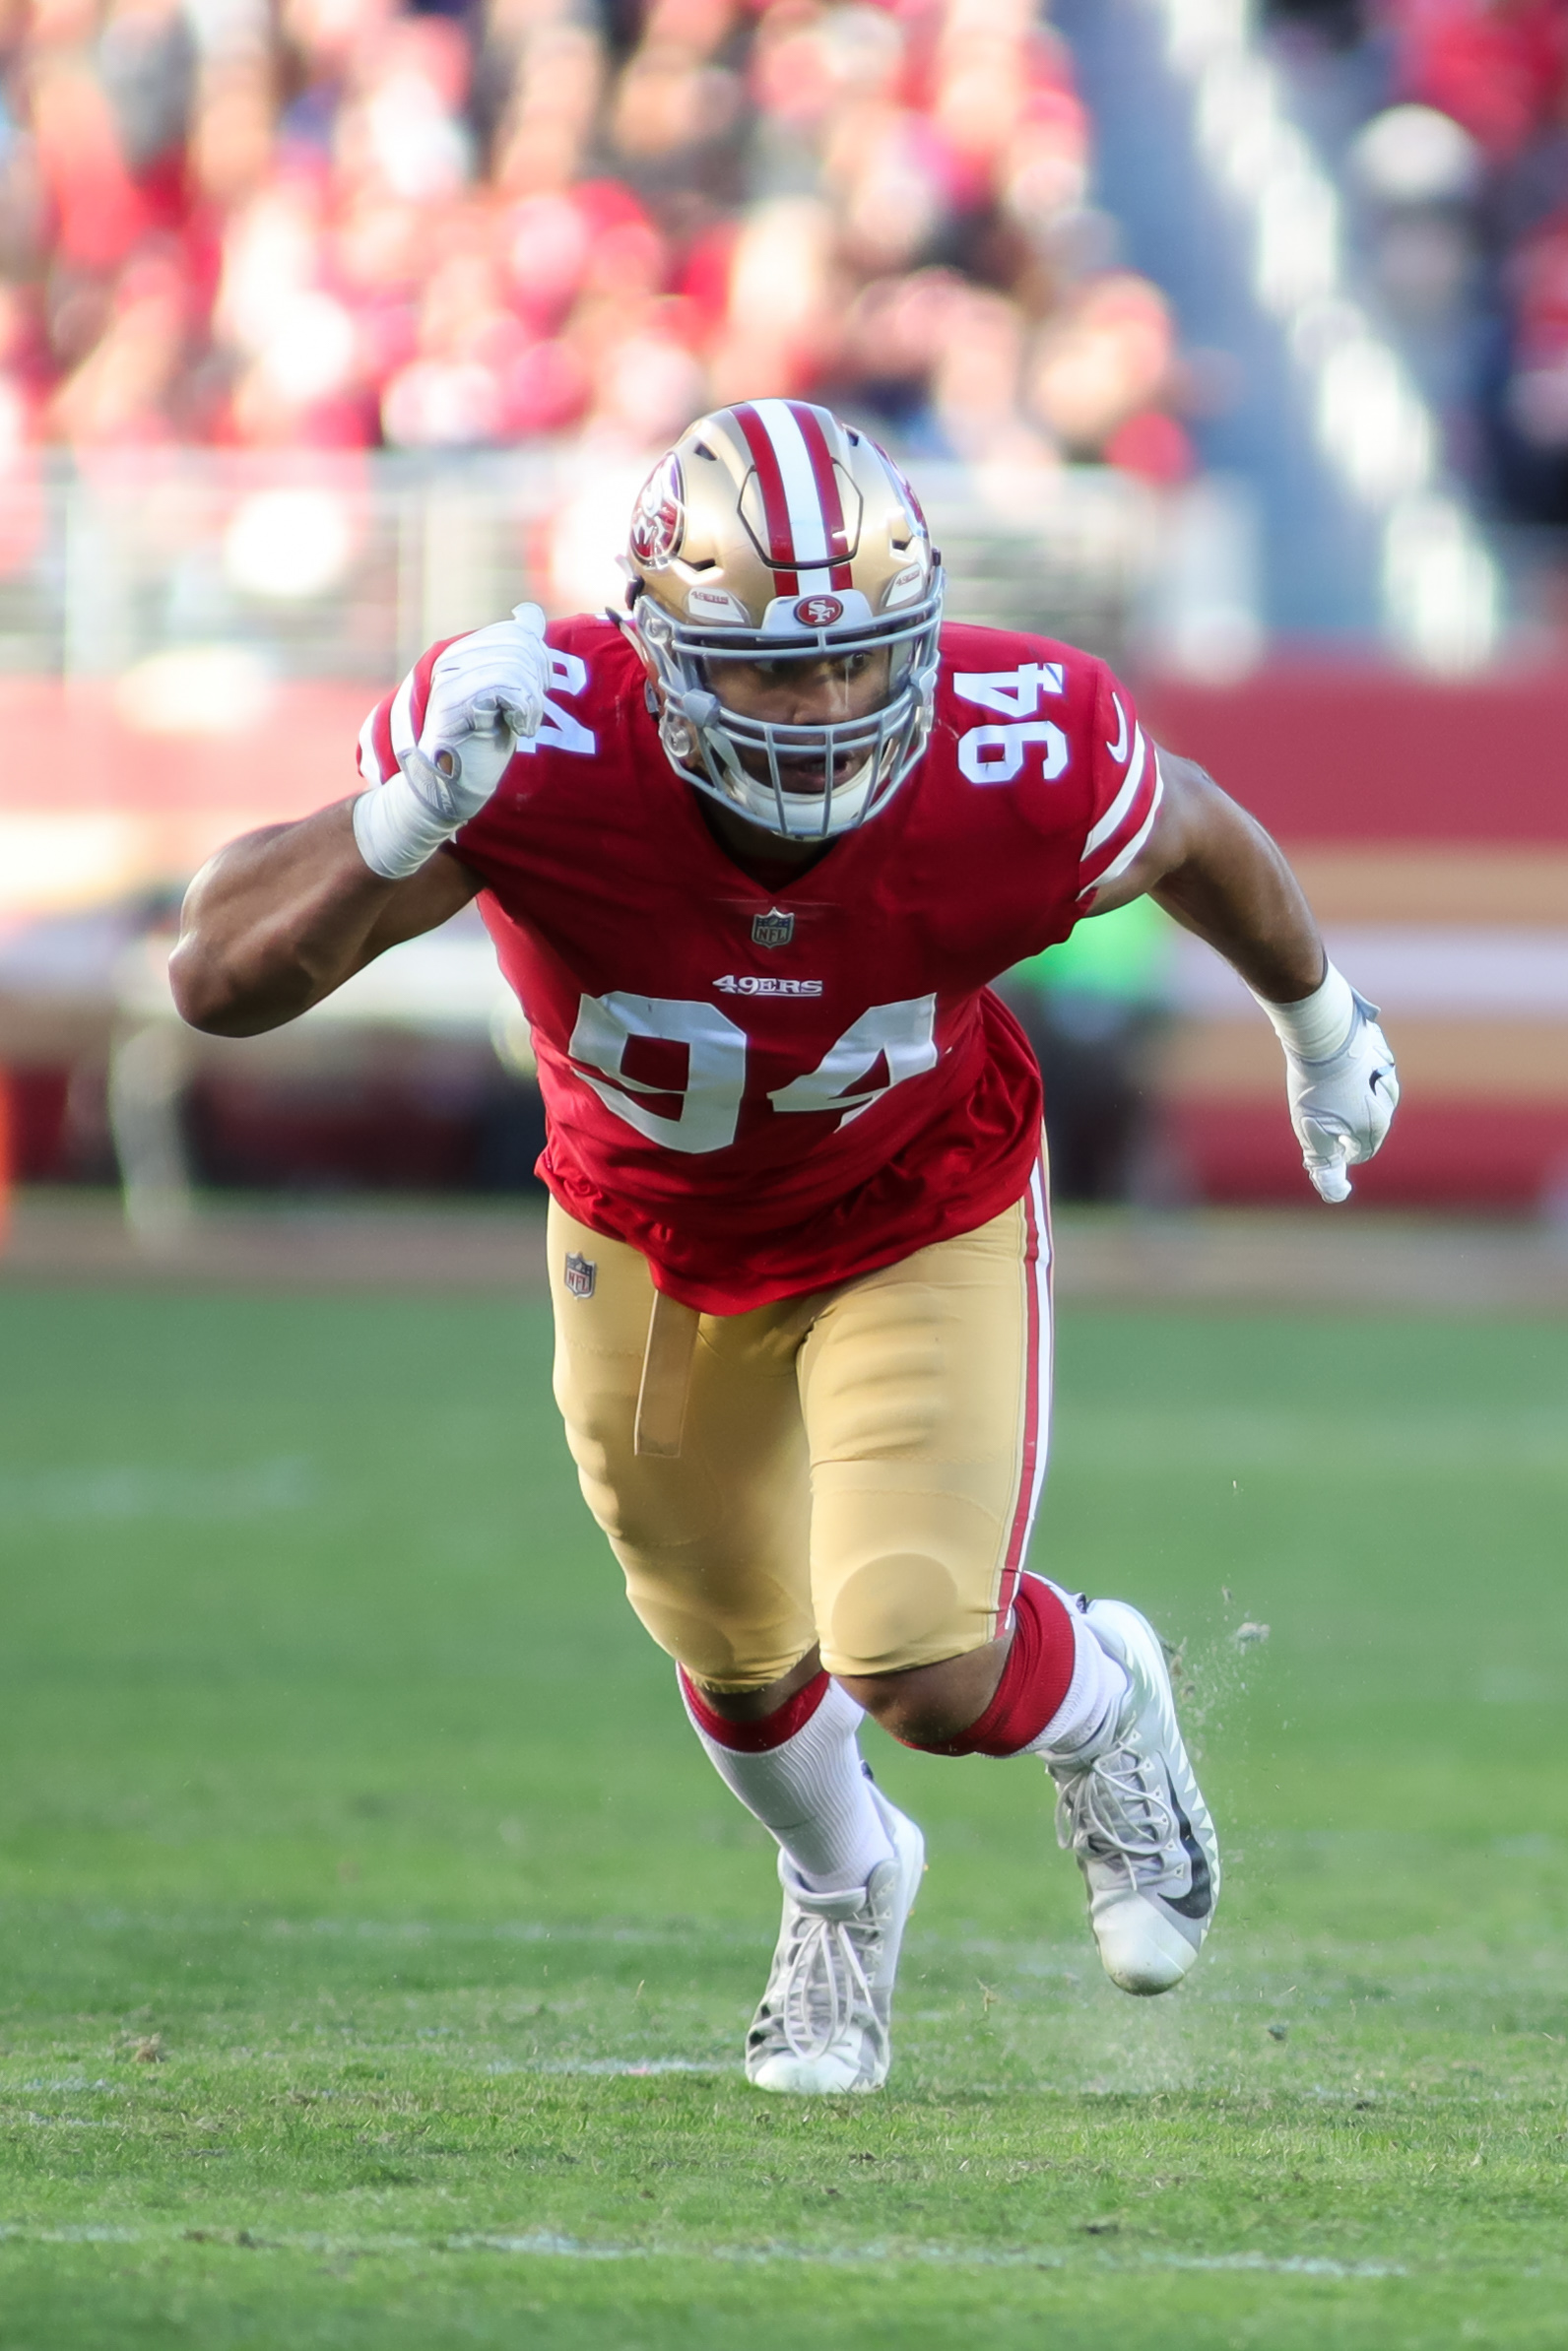 49ers declining fifth-year option for Solomon Thomas, per report